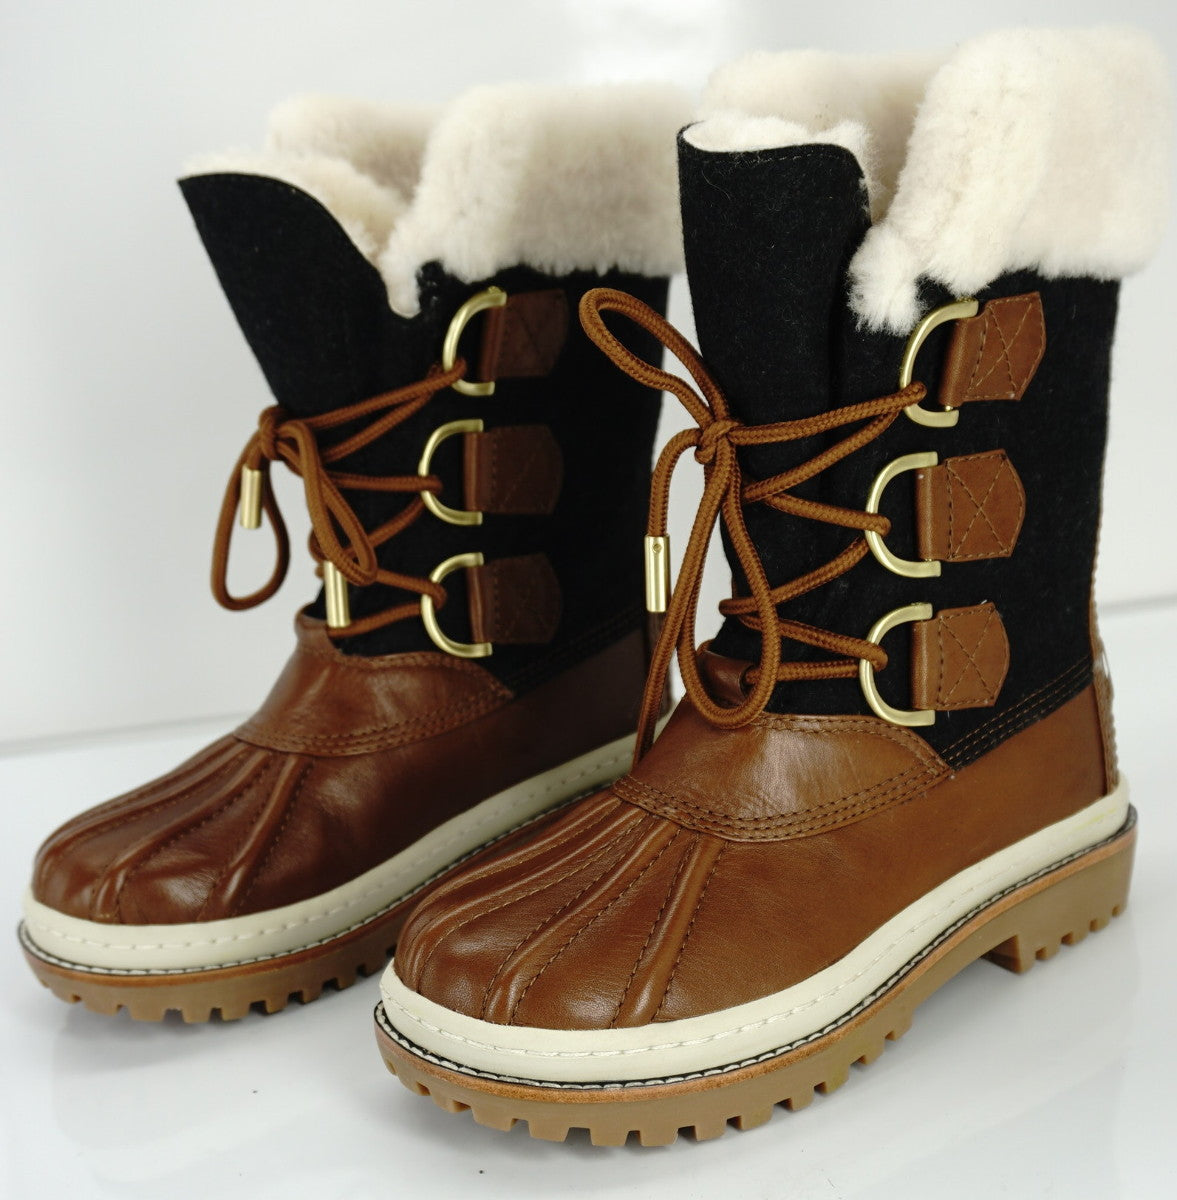 Tory Burch Grey Flannel Brown Leather Duck Boots Size 5 Shearling Trim NIB $295